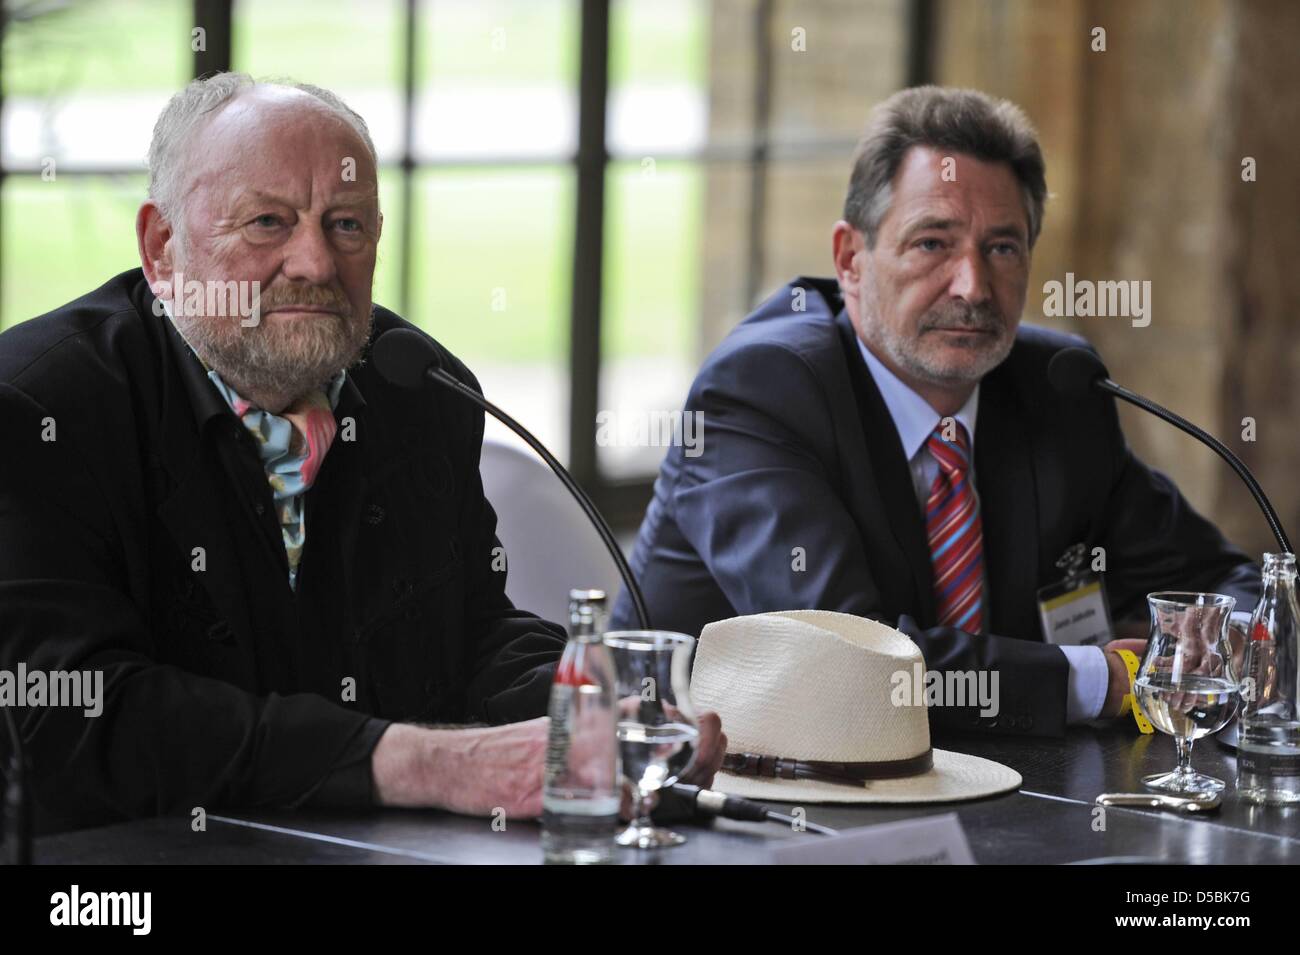 Danish cartoonist Kurt Westergaard (L) and the Mayor of Potsdam Jann Jakobs speak during a news conference before the award of the M100 Media Prize 2010 in Potsdam, Germany, 8 September 2010. Westergaard initiated a controversial with 12 caricatures of the Prophet Mohammed, that were first published in a Danish newspaper in 2005. The draw Stock Photo